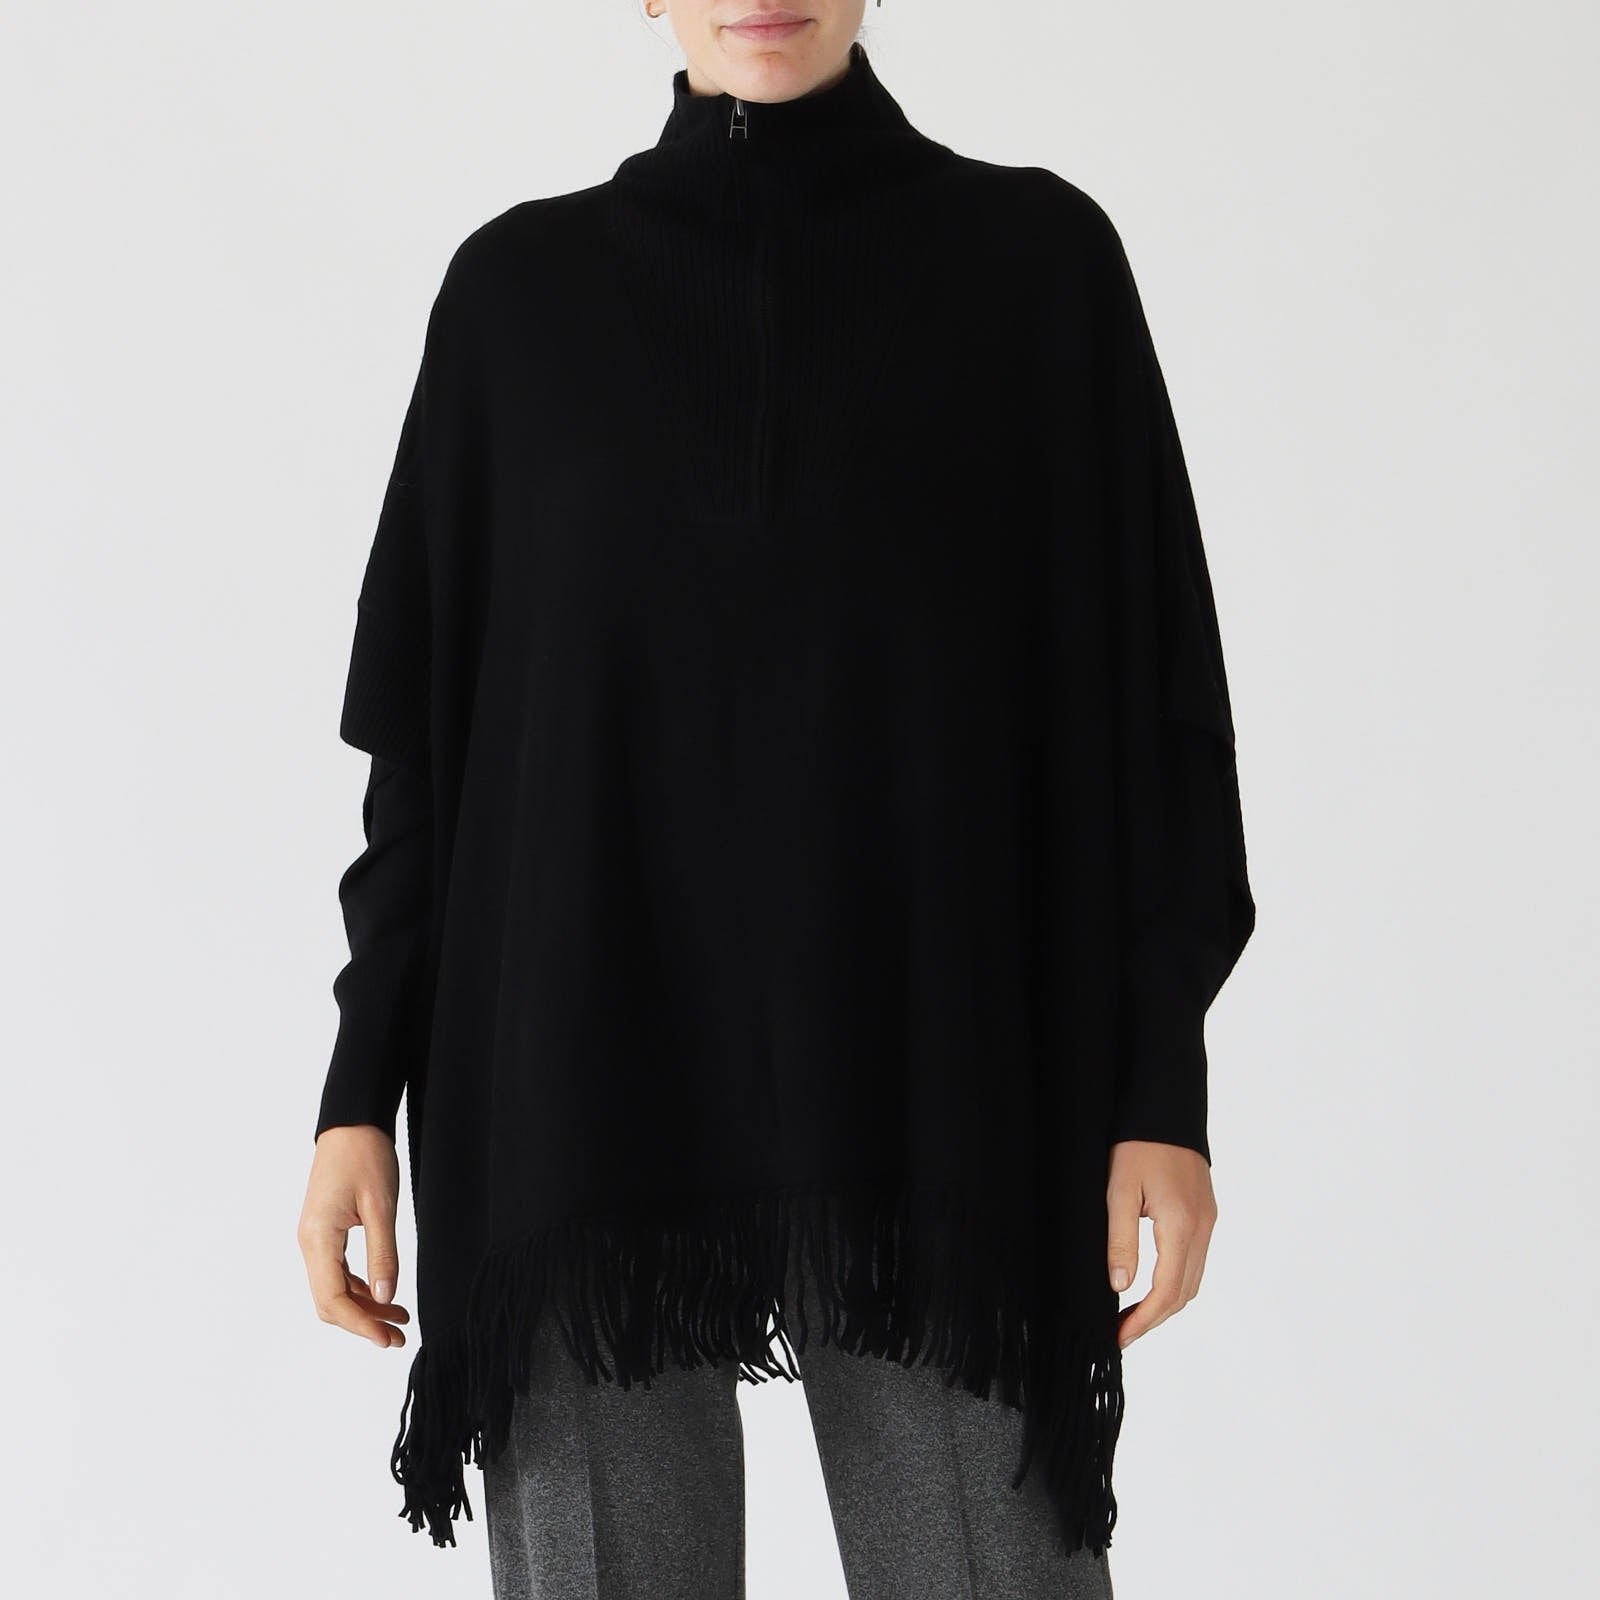 Black Fringed Poncho With Zip-Up Collar